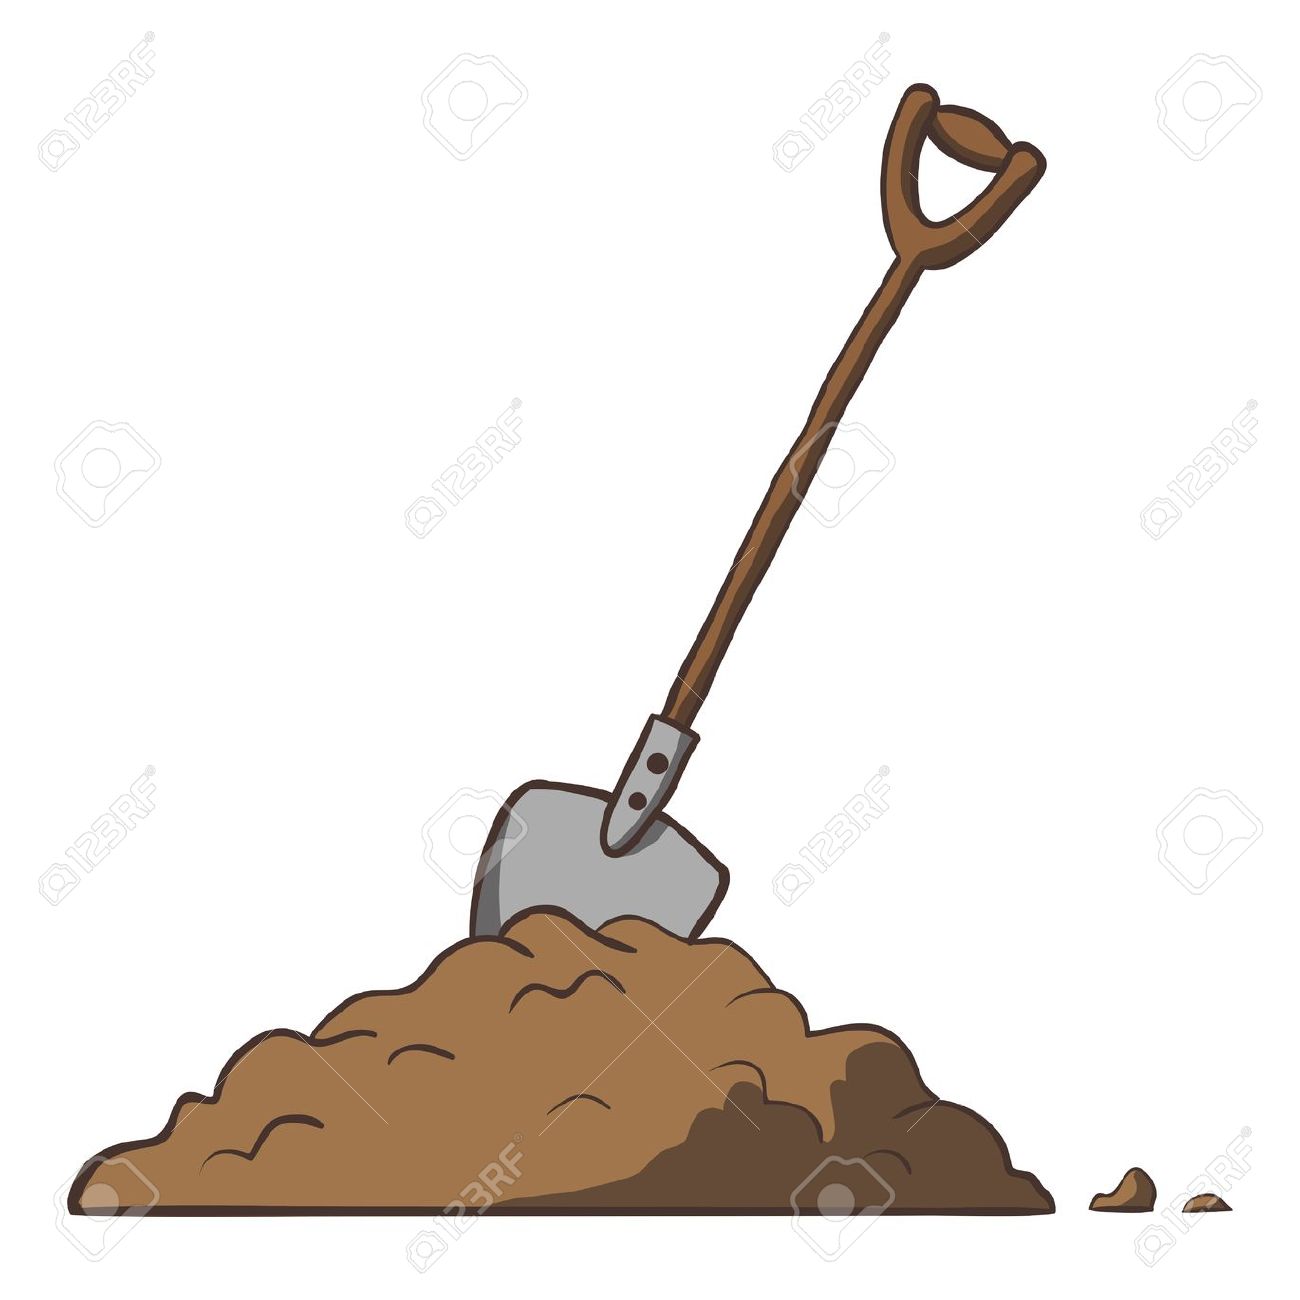 Digging A Hole PNG - 166723